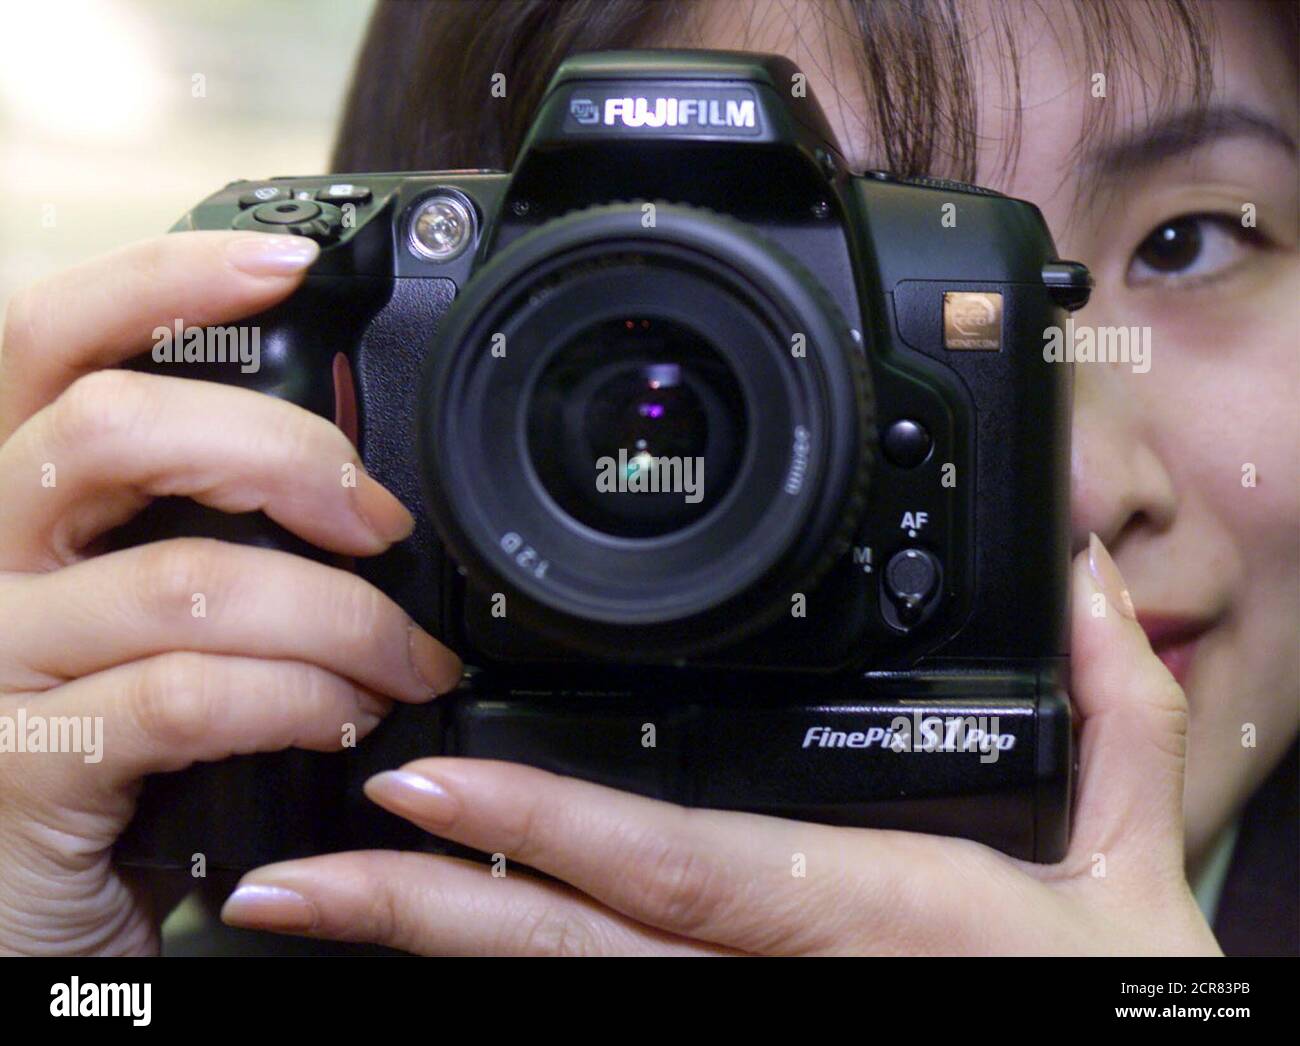 Fuji Film worker Kazumi Hiraiwa demonstrates the newly developed 6.1 megapixel digital SLR camera FinePix S1Pro in Tokyo January 31. The camera features a 23.3x15.6-mm Super CCD bringing 6.1 million pixels (3,040x2,016) and works with the F mount Nikon lenses. The camera has two slots for storage media of SmartMedia, CompactFlash card and IBM microdrive. The camera targeted for professional photographer has a range of shutter speeds from 30 seconds to 1/2,000 seconds with 1.5 frames per second and offers four equivalent ISO sensitivity from 320 to 1600. Fuji Film said the camera will be on sal Stock Photo